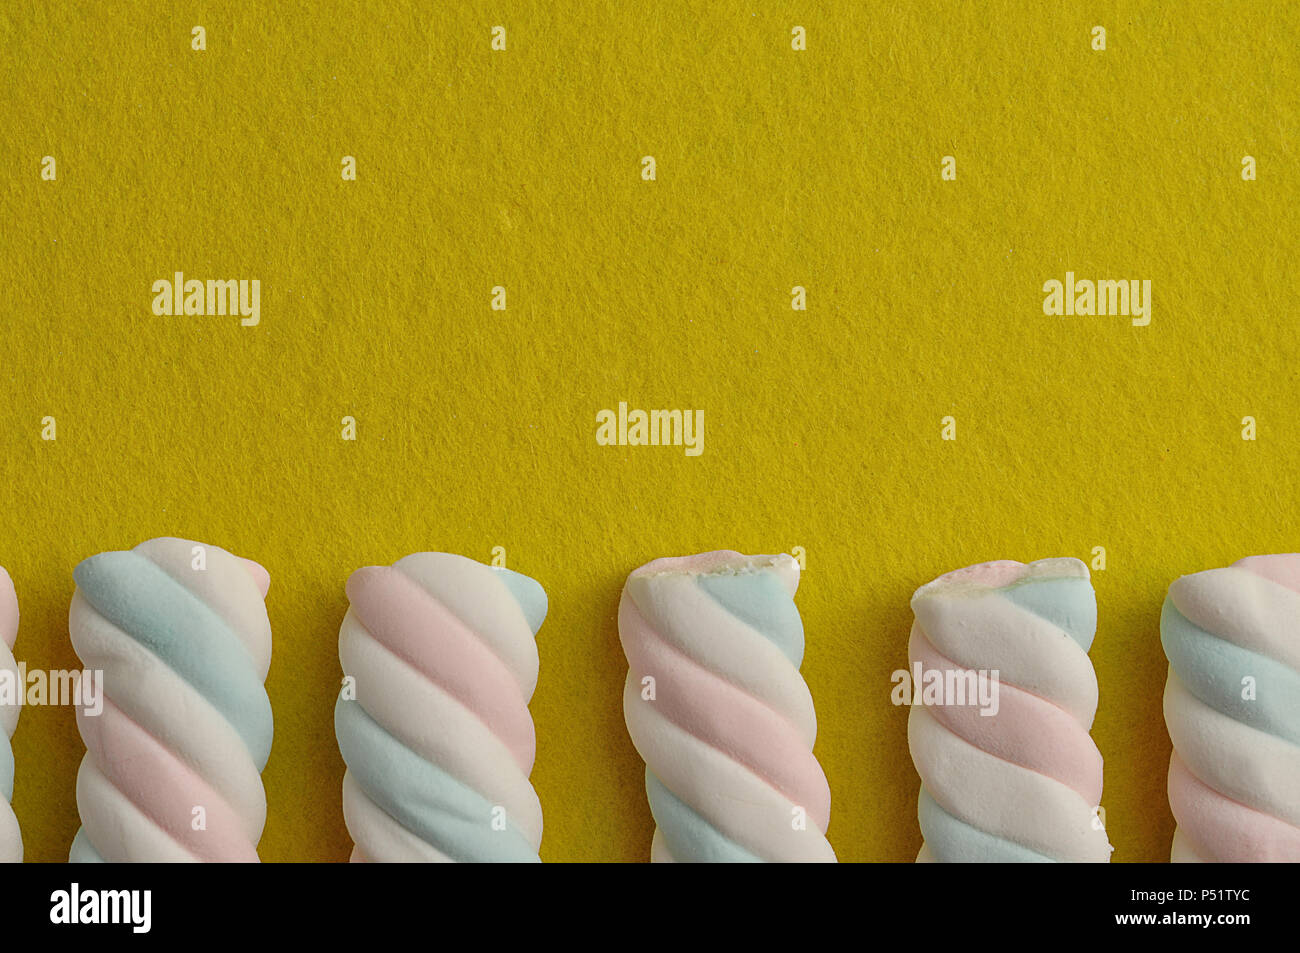 A row of pastel colored marshmallows on a yellow background Stock Photo